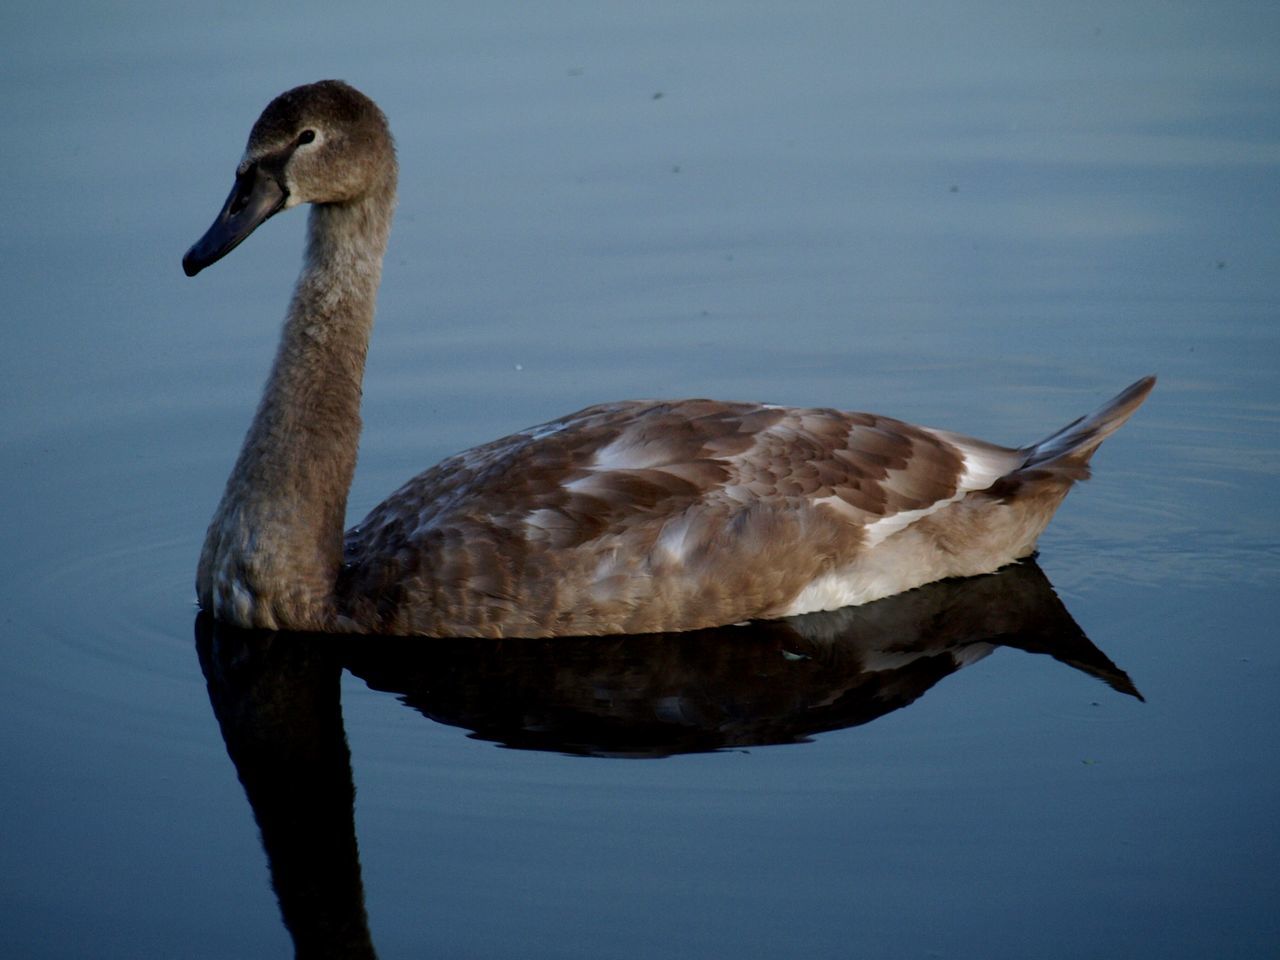 SIDE VIEW OF DUCK SWIMMING IN LAKE